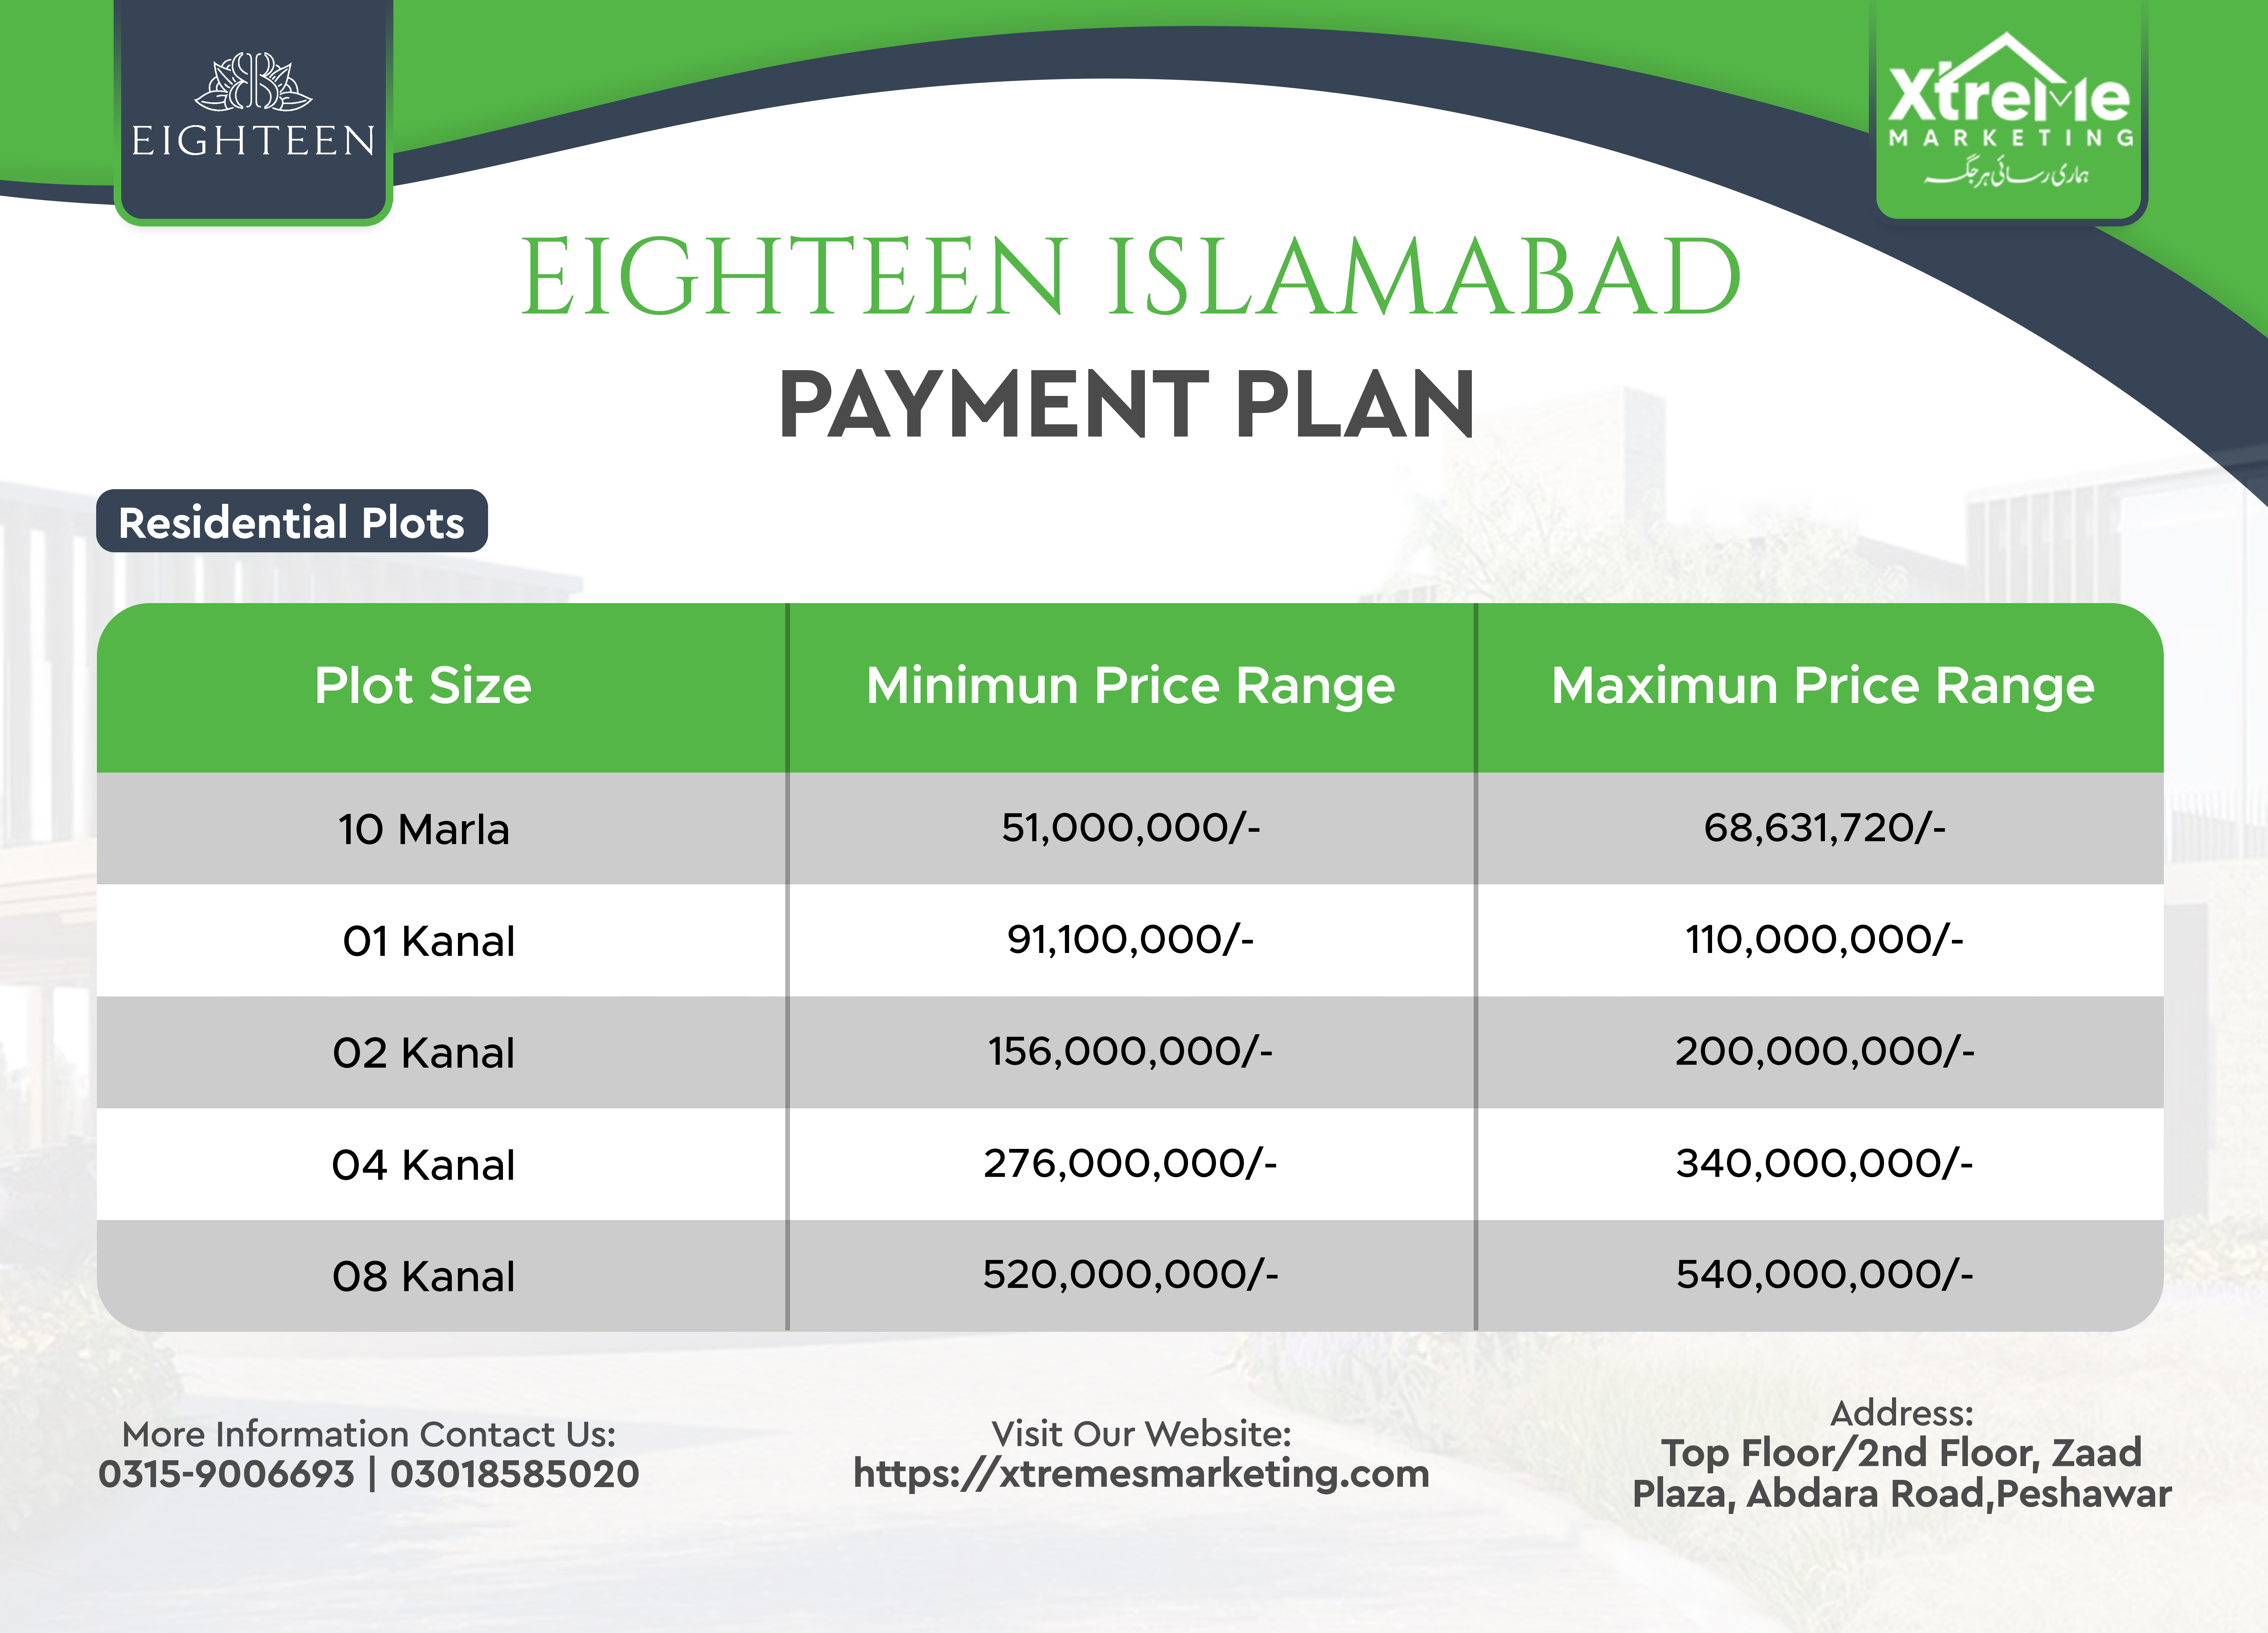 EIGHTEEN ISLAMABAD RESIDENTIAL PAYMENT PLAN